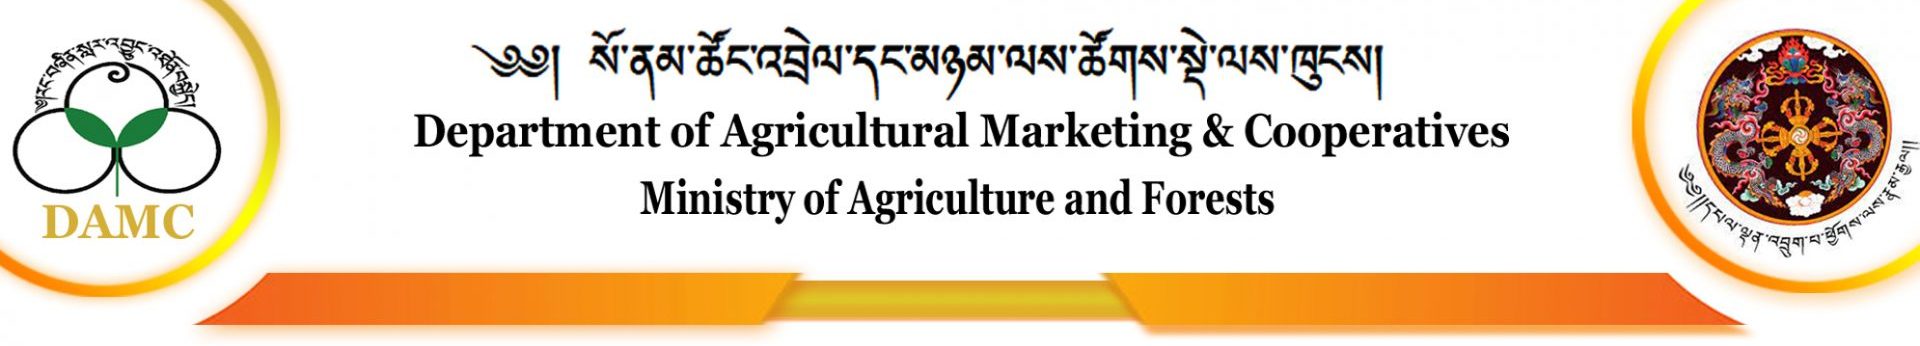 Department of Agricultural Marketing and Cooperatives